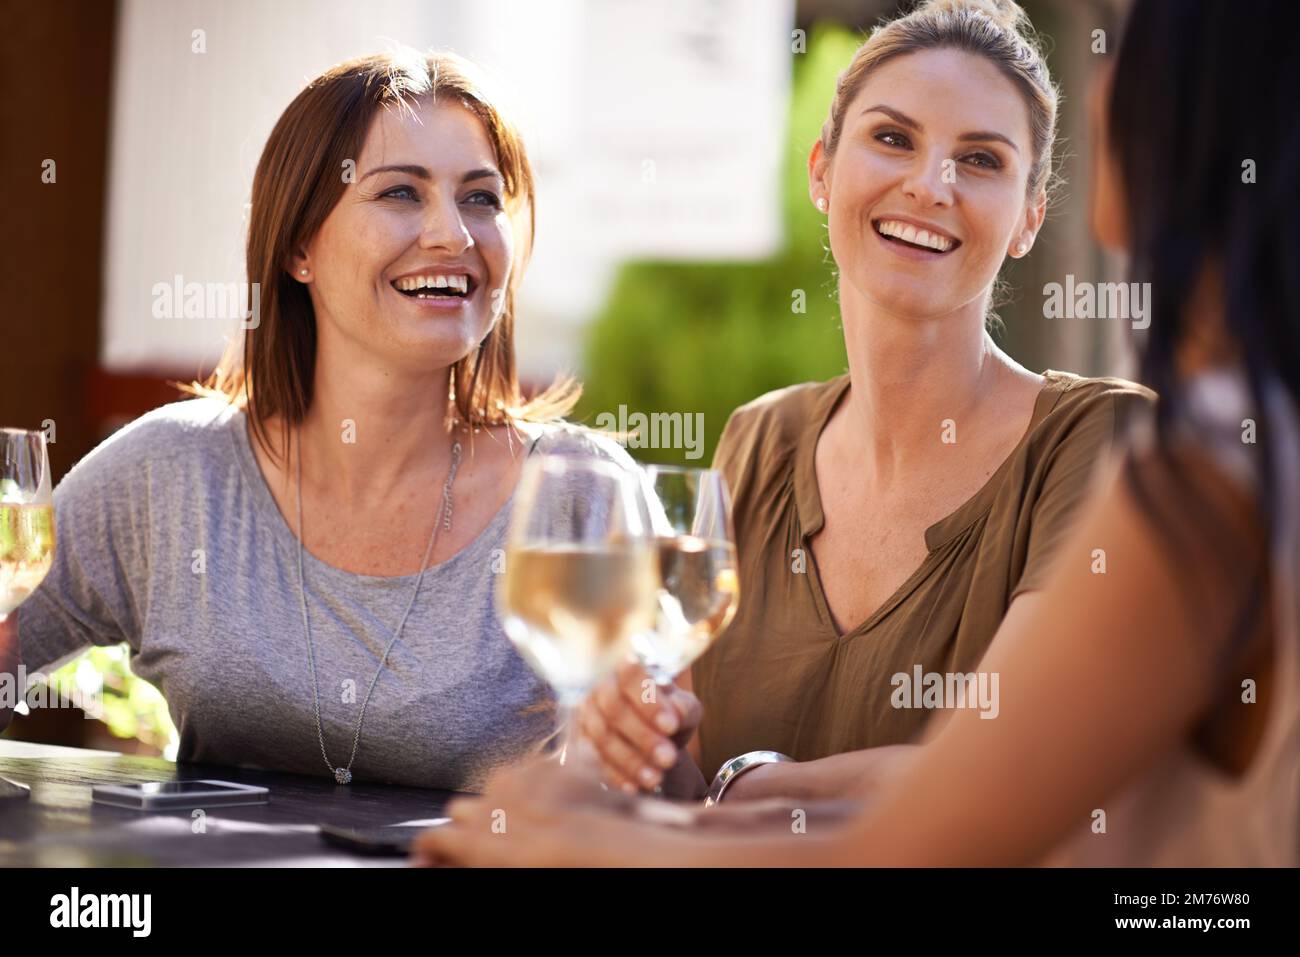 Winding down together after work. a happy group of friends having a drink together. Stock Photo